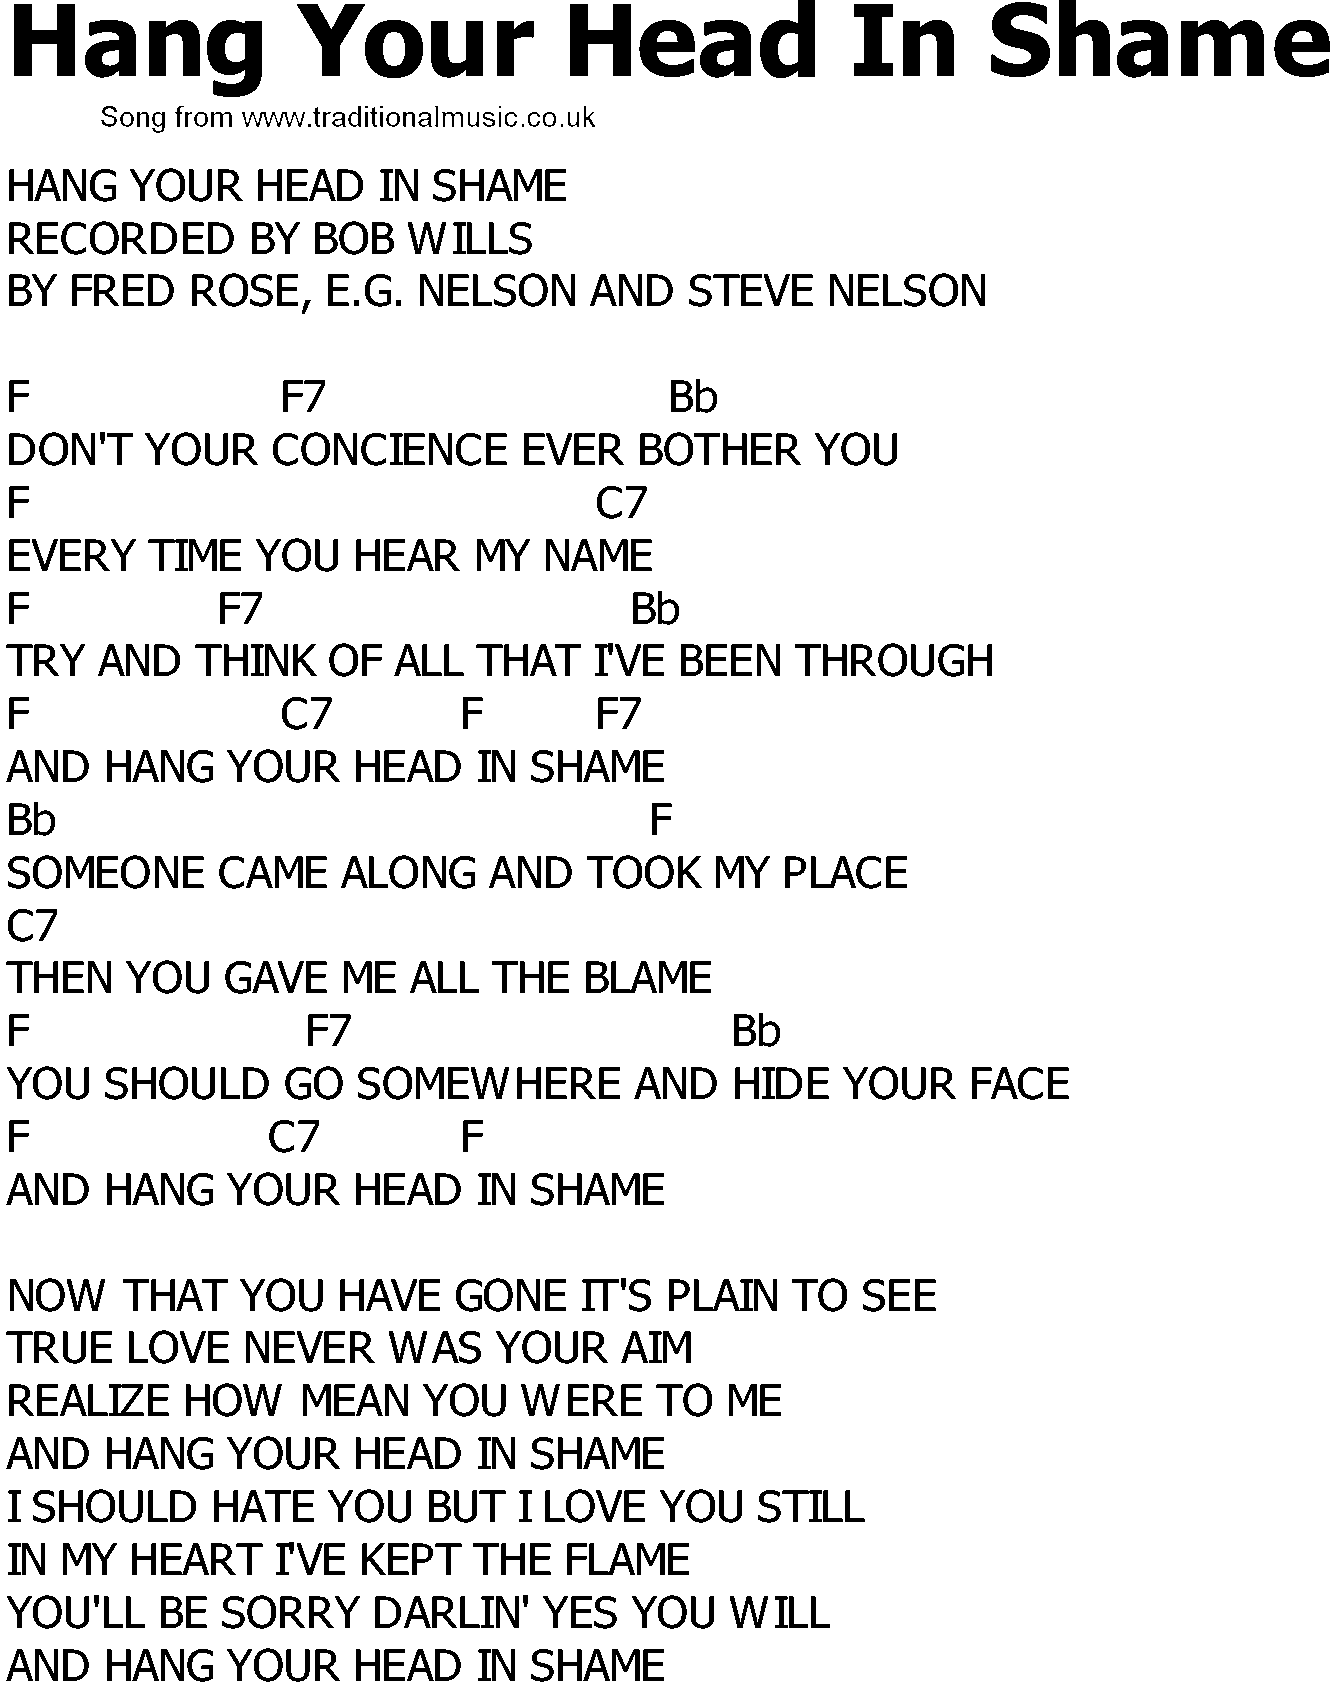 Old Country song lyrics with chords - Hang Your Head In Shame